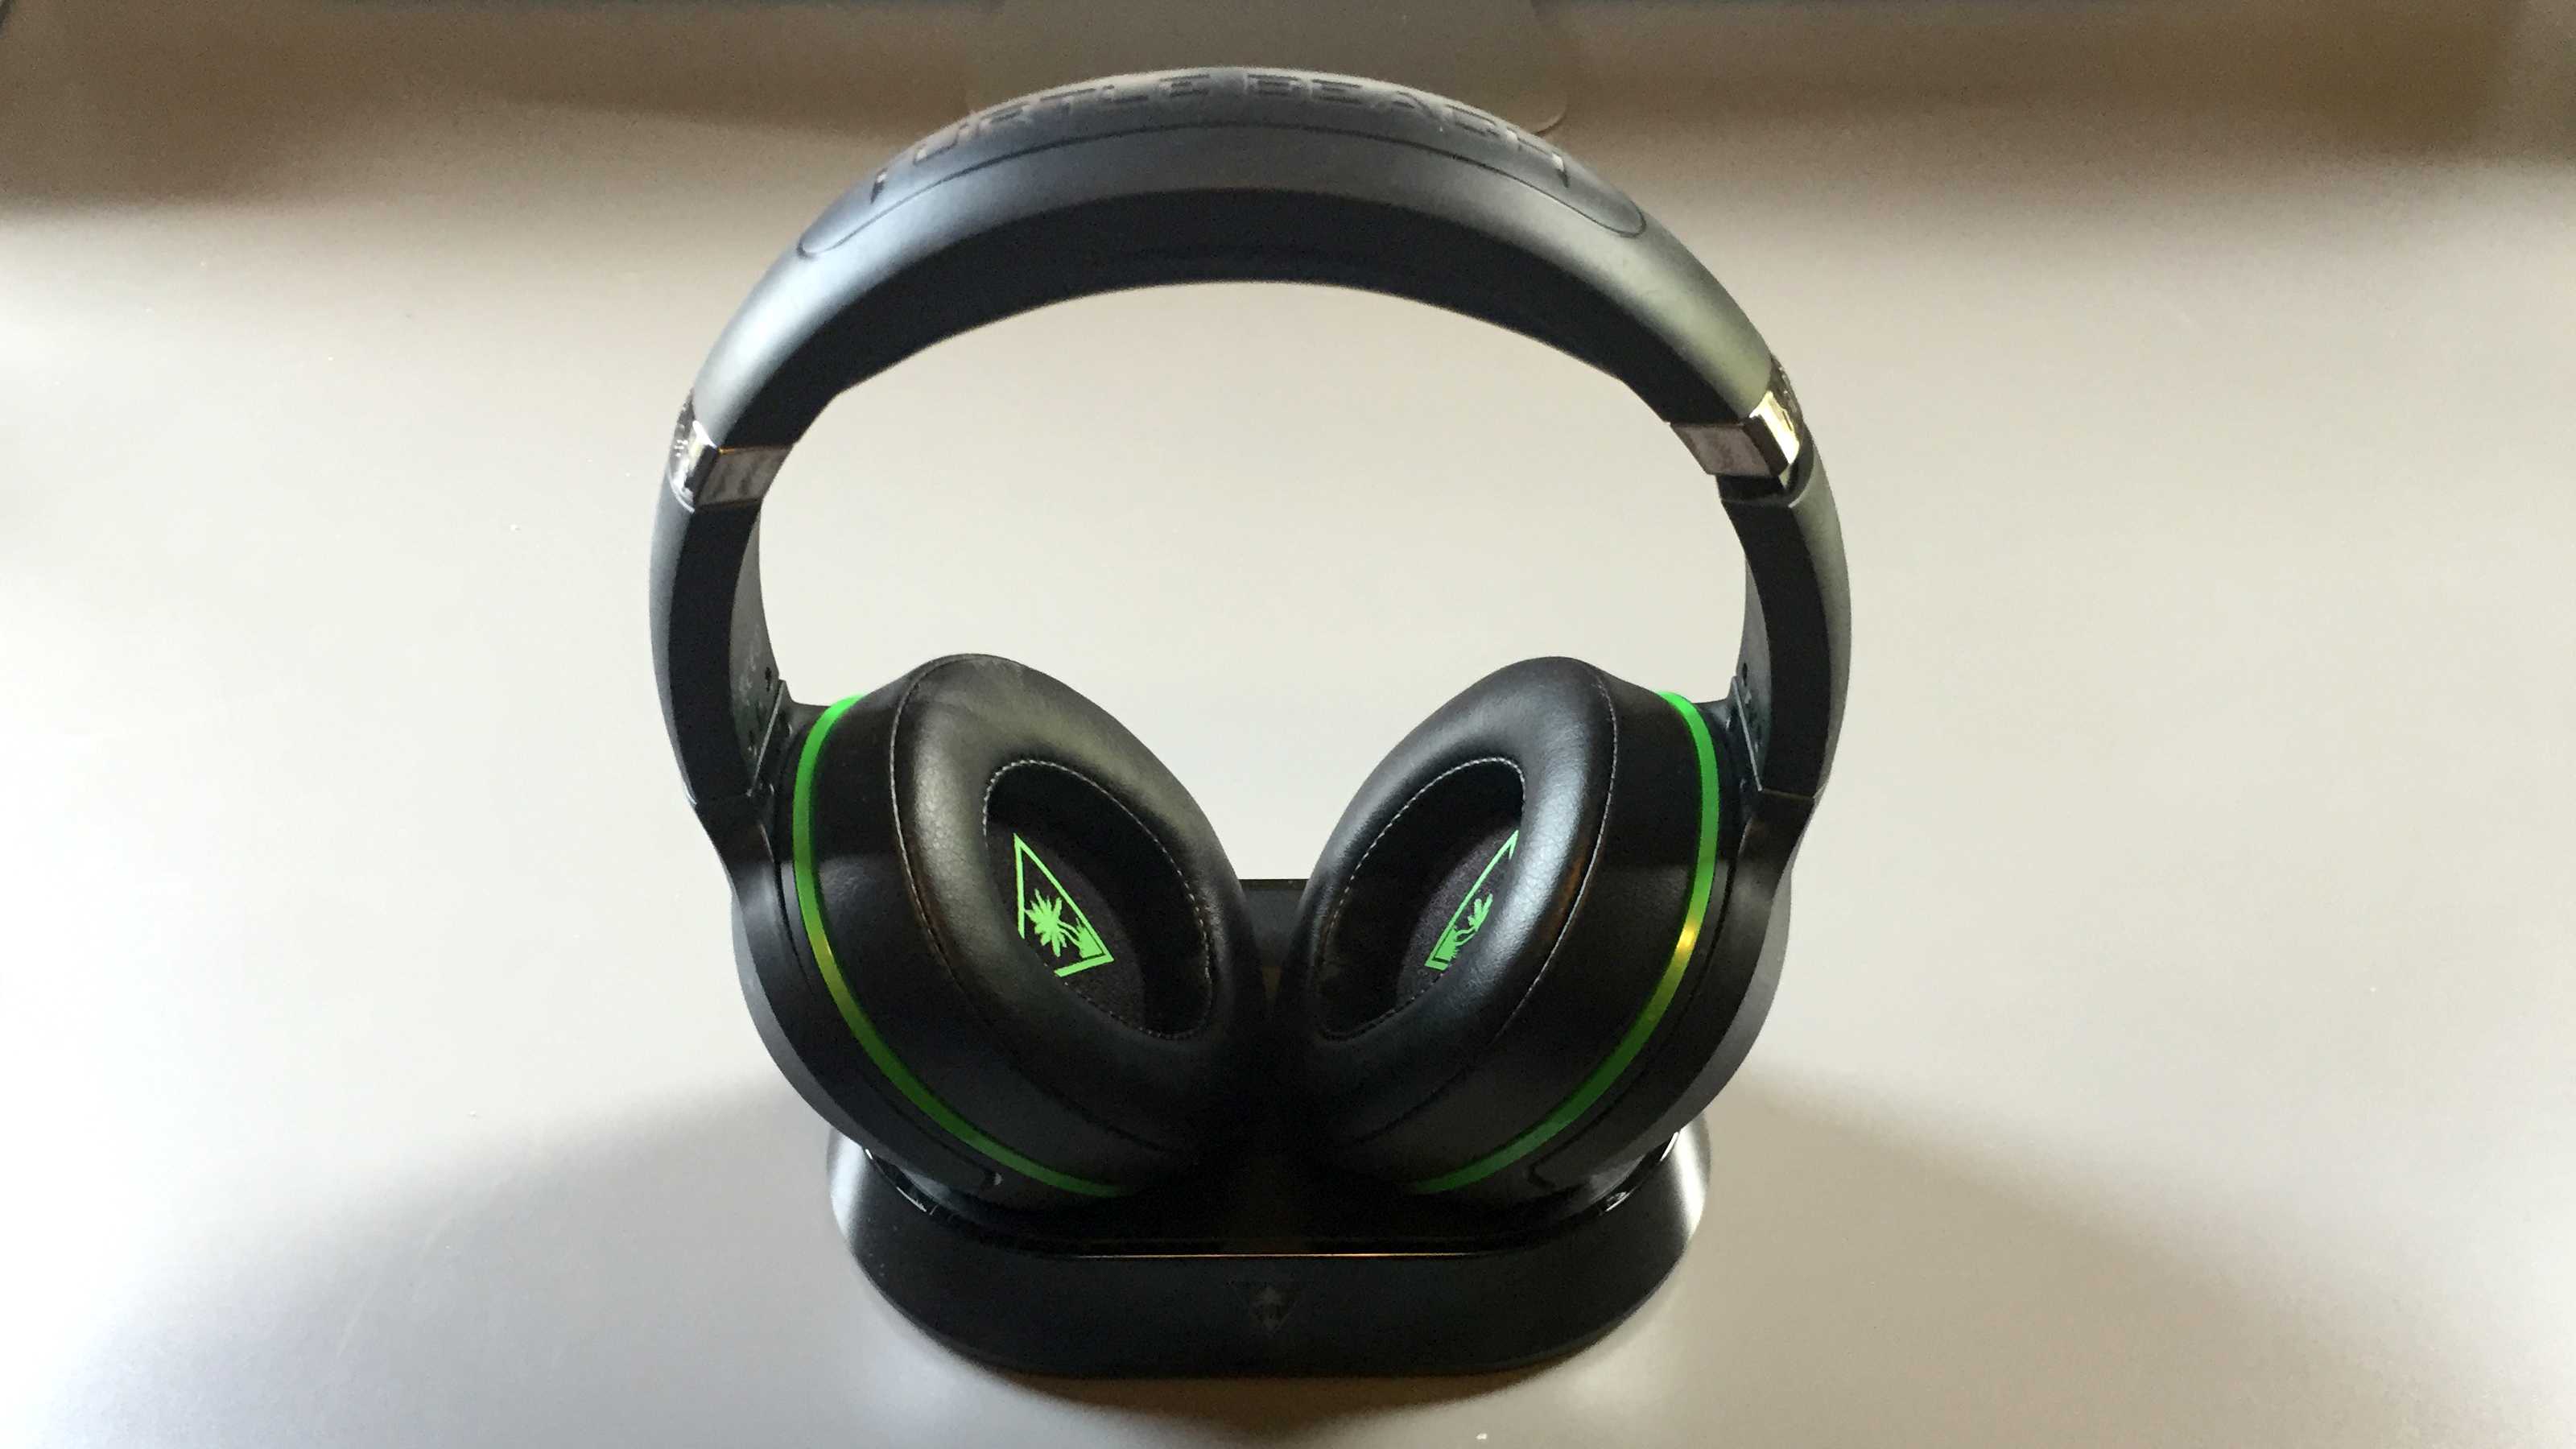 Turtle beach - ear force elite 800 - premium fully wireless gaming headset - dts headphone:x 7.1 surround sound - noise cancellation - superhuman hearing - ps4, ps3, and mobile devices